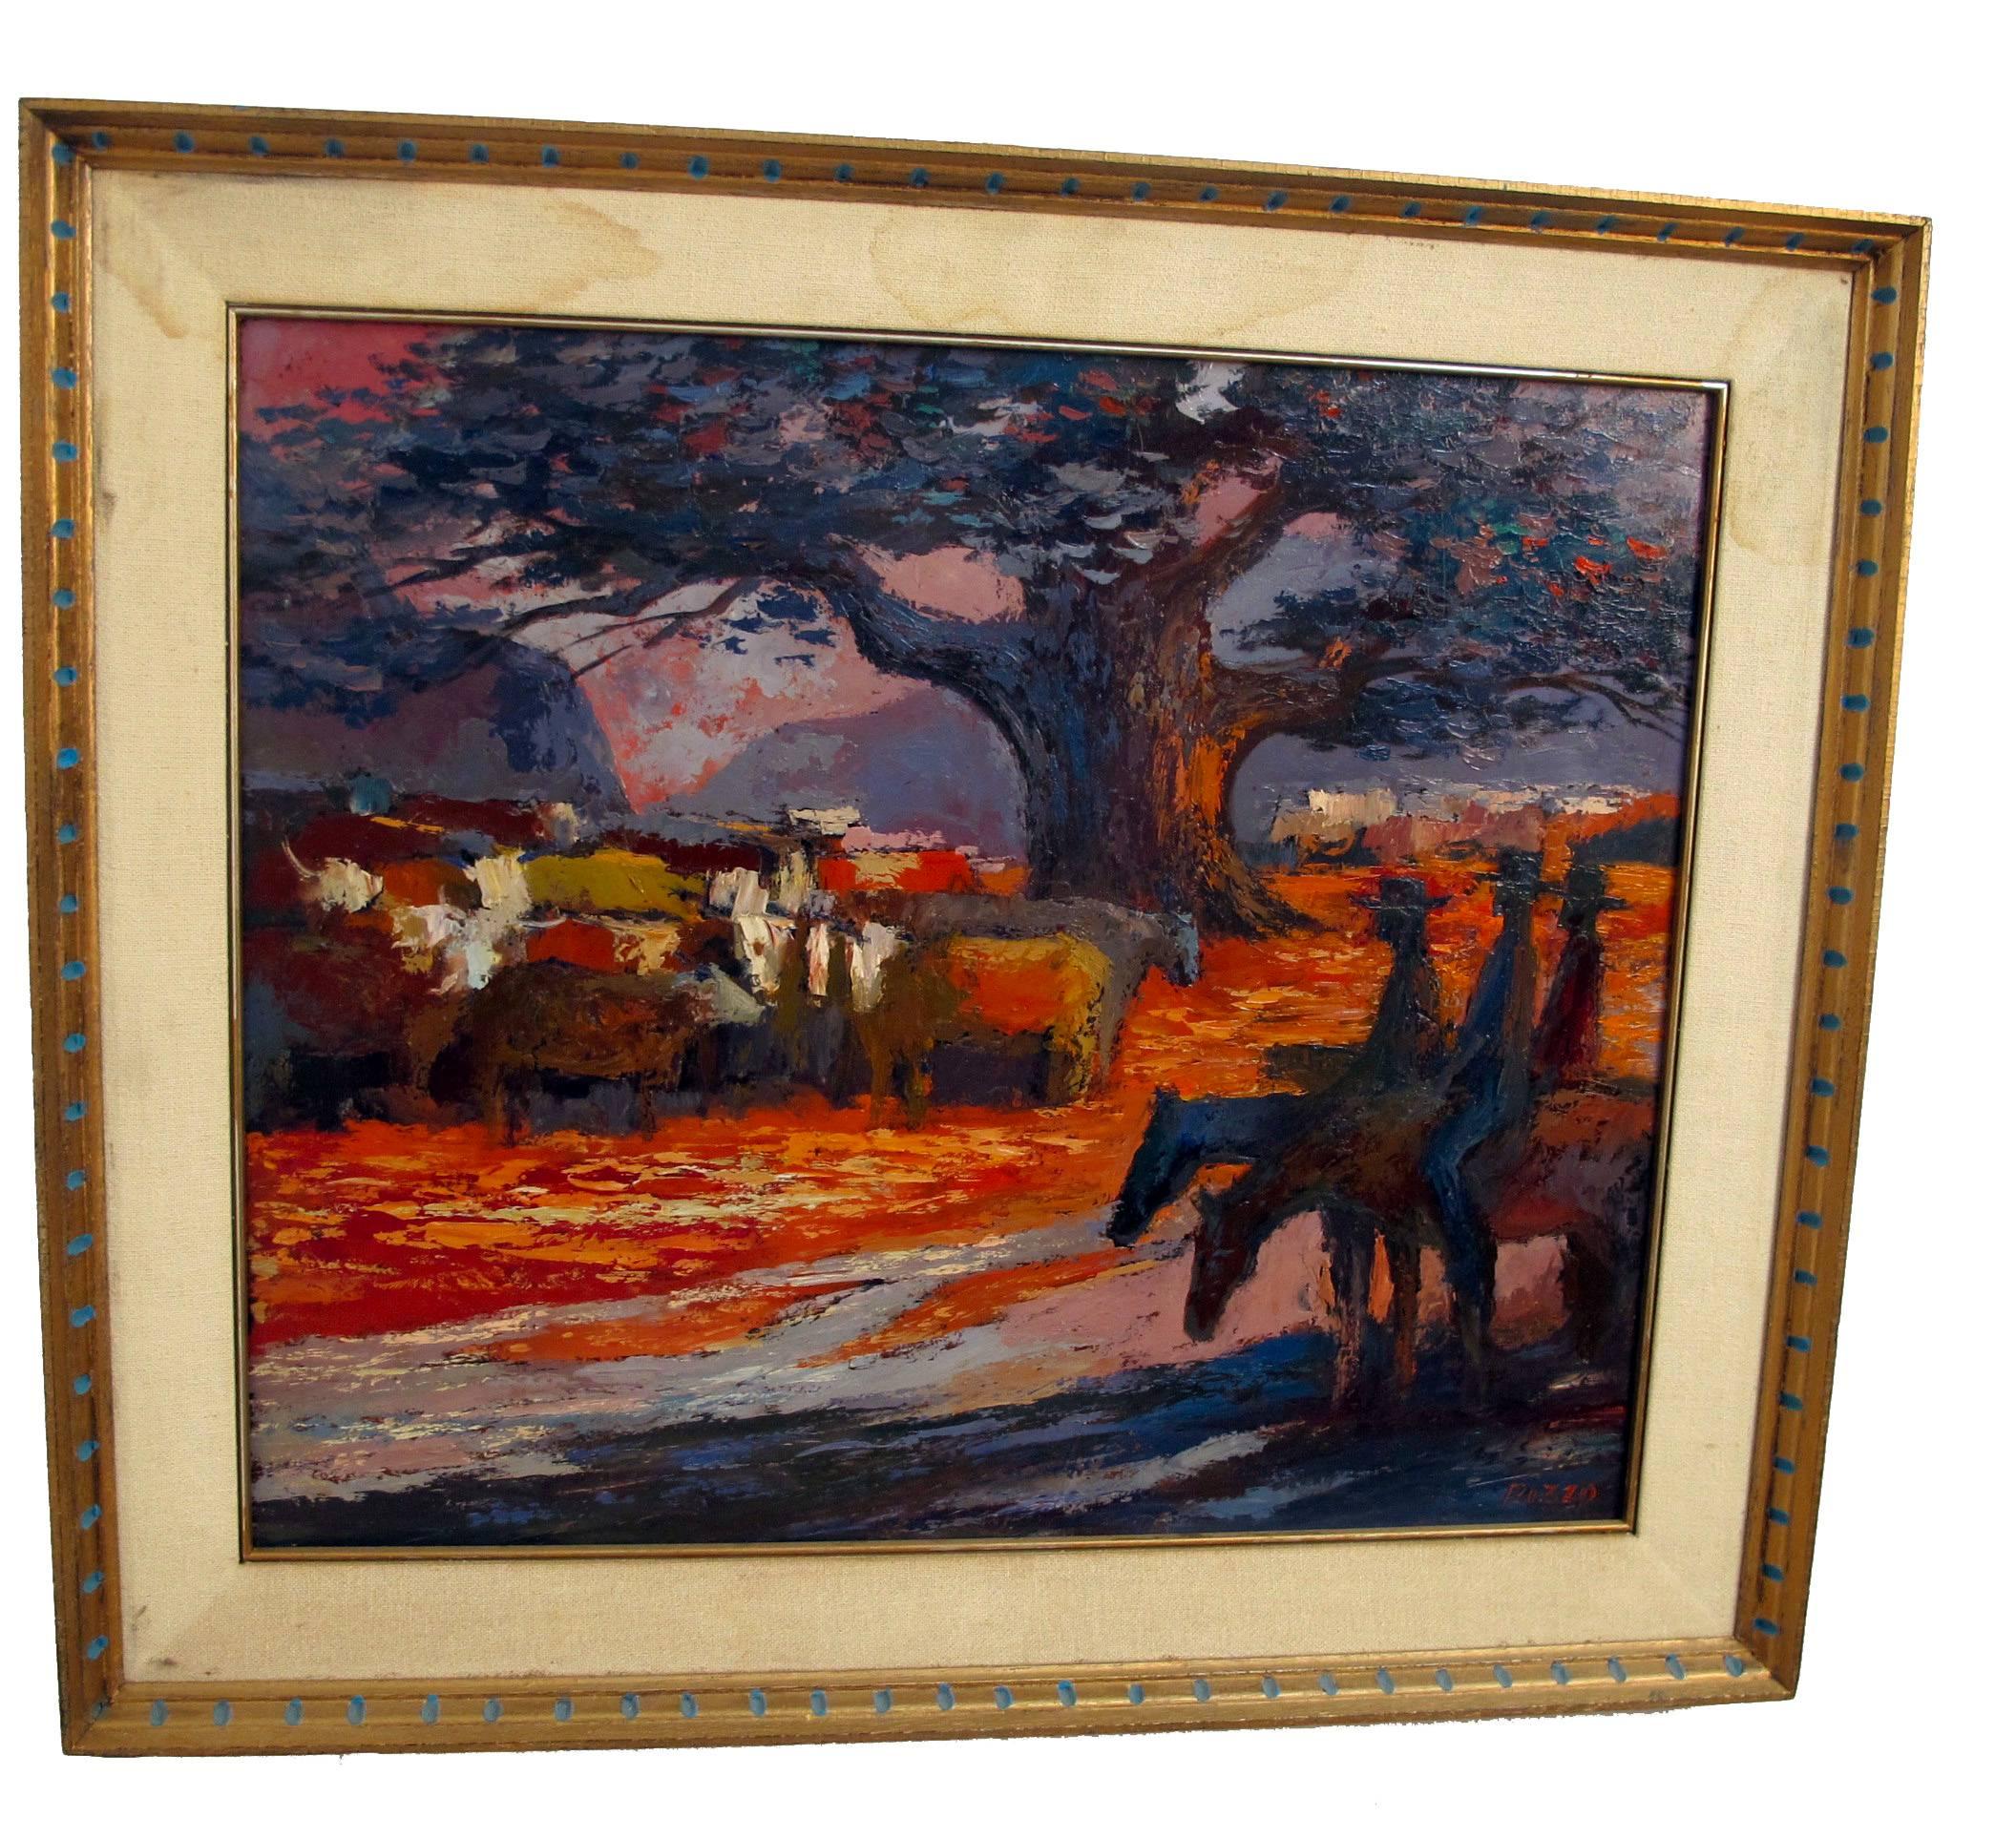 Western landscape oil on panel in original frame by California artist Anthony Rizzo (b.1919-d.2000). American, mid-20th century.

The following information is from Anthony C Rizzo, oldest son of the artist: 
 He worked for Walt Disney, starting I